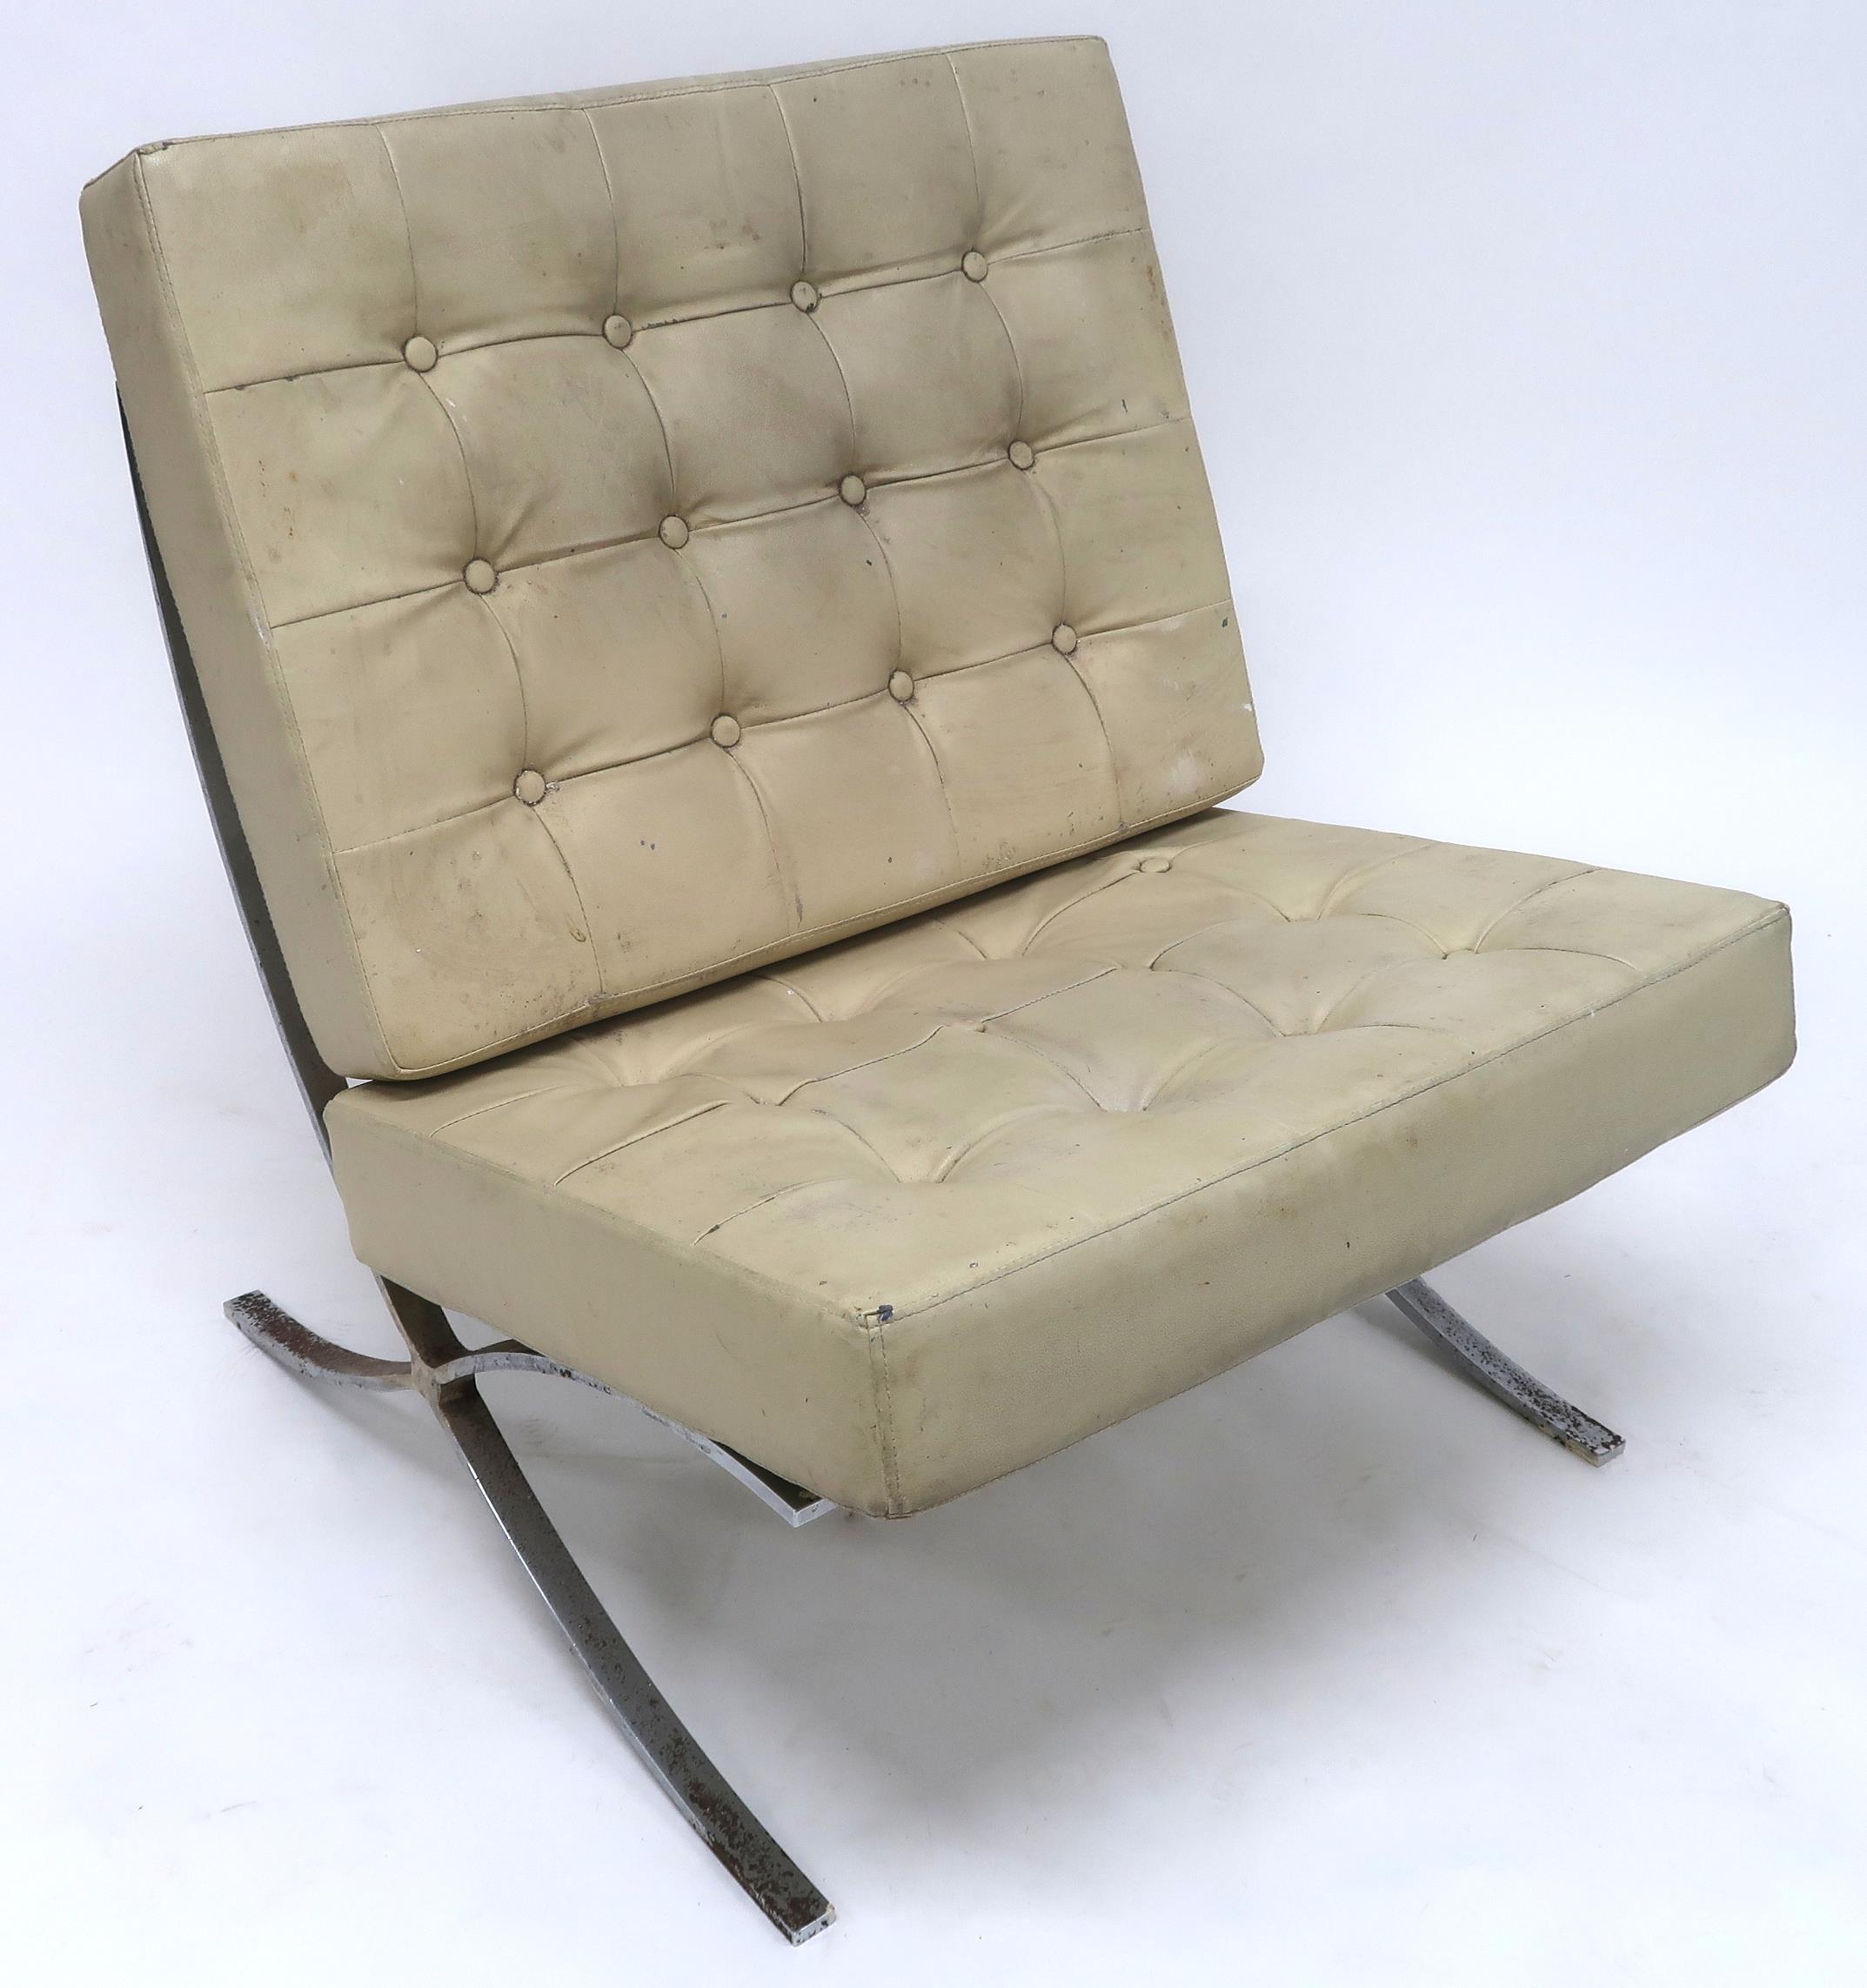 A 20TH CENTURY AFTER LUDWIG MIES VAN DER ROHE "BARCELONA" CHAIR with cream vinyl button back - Image 7 of 7